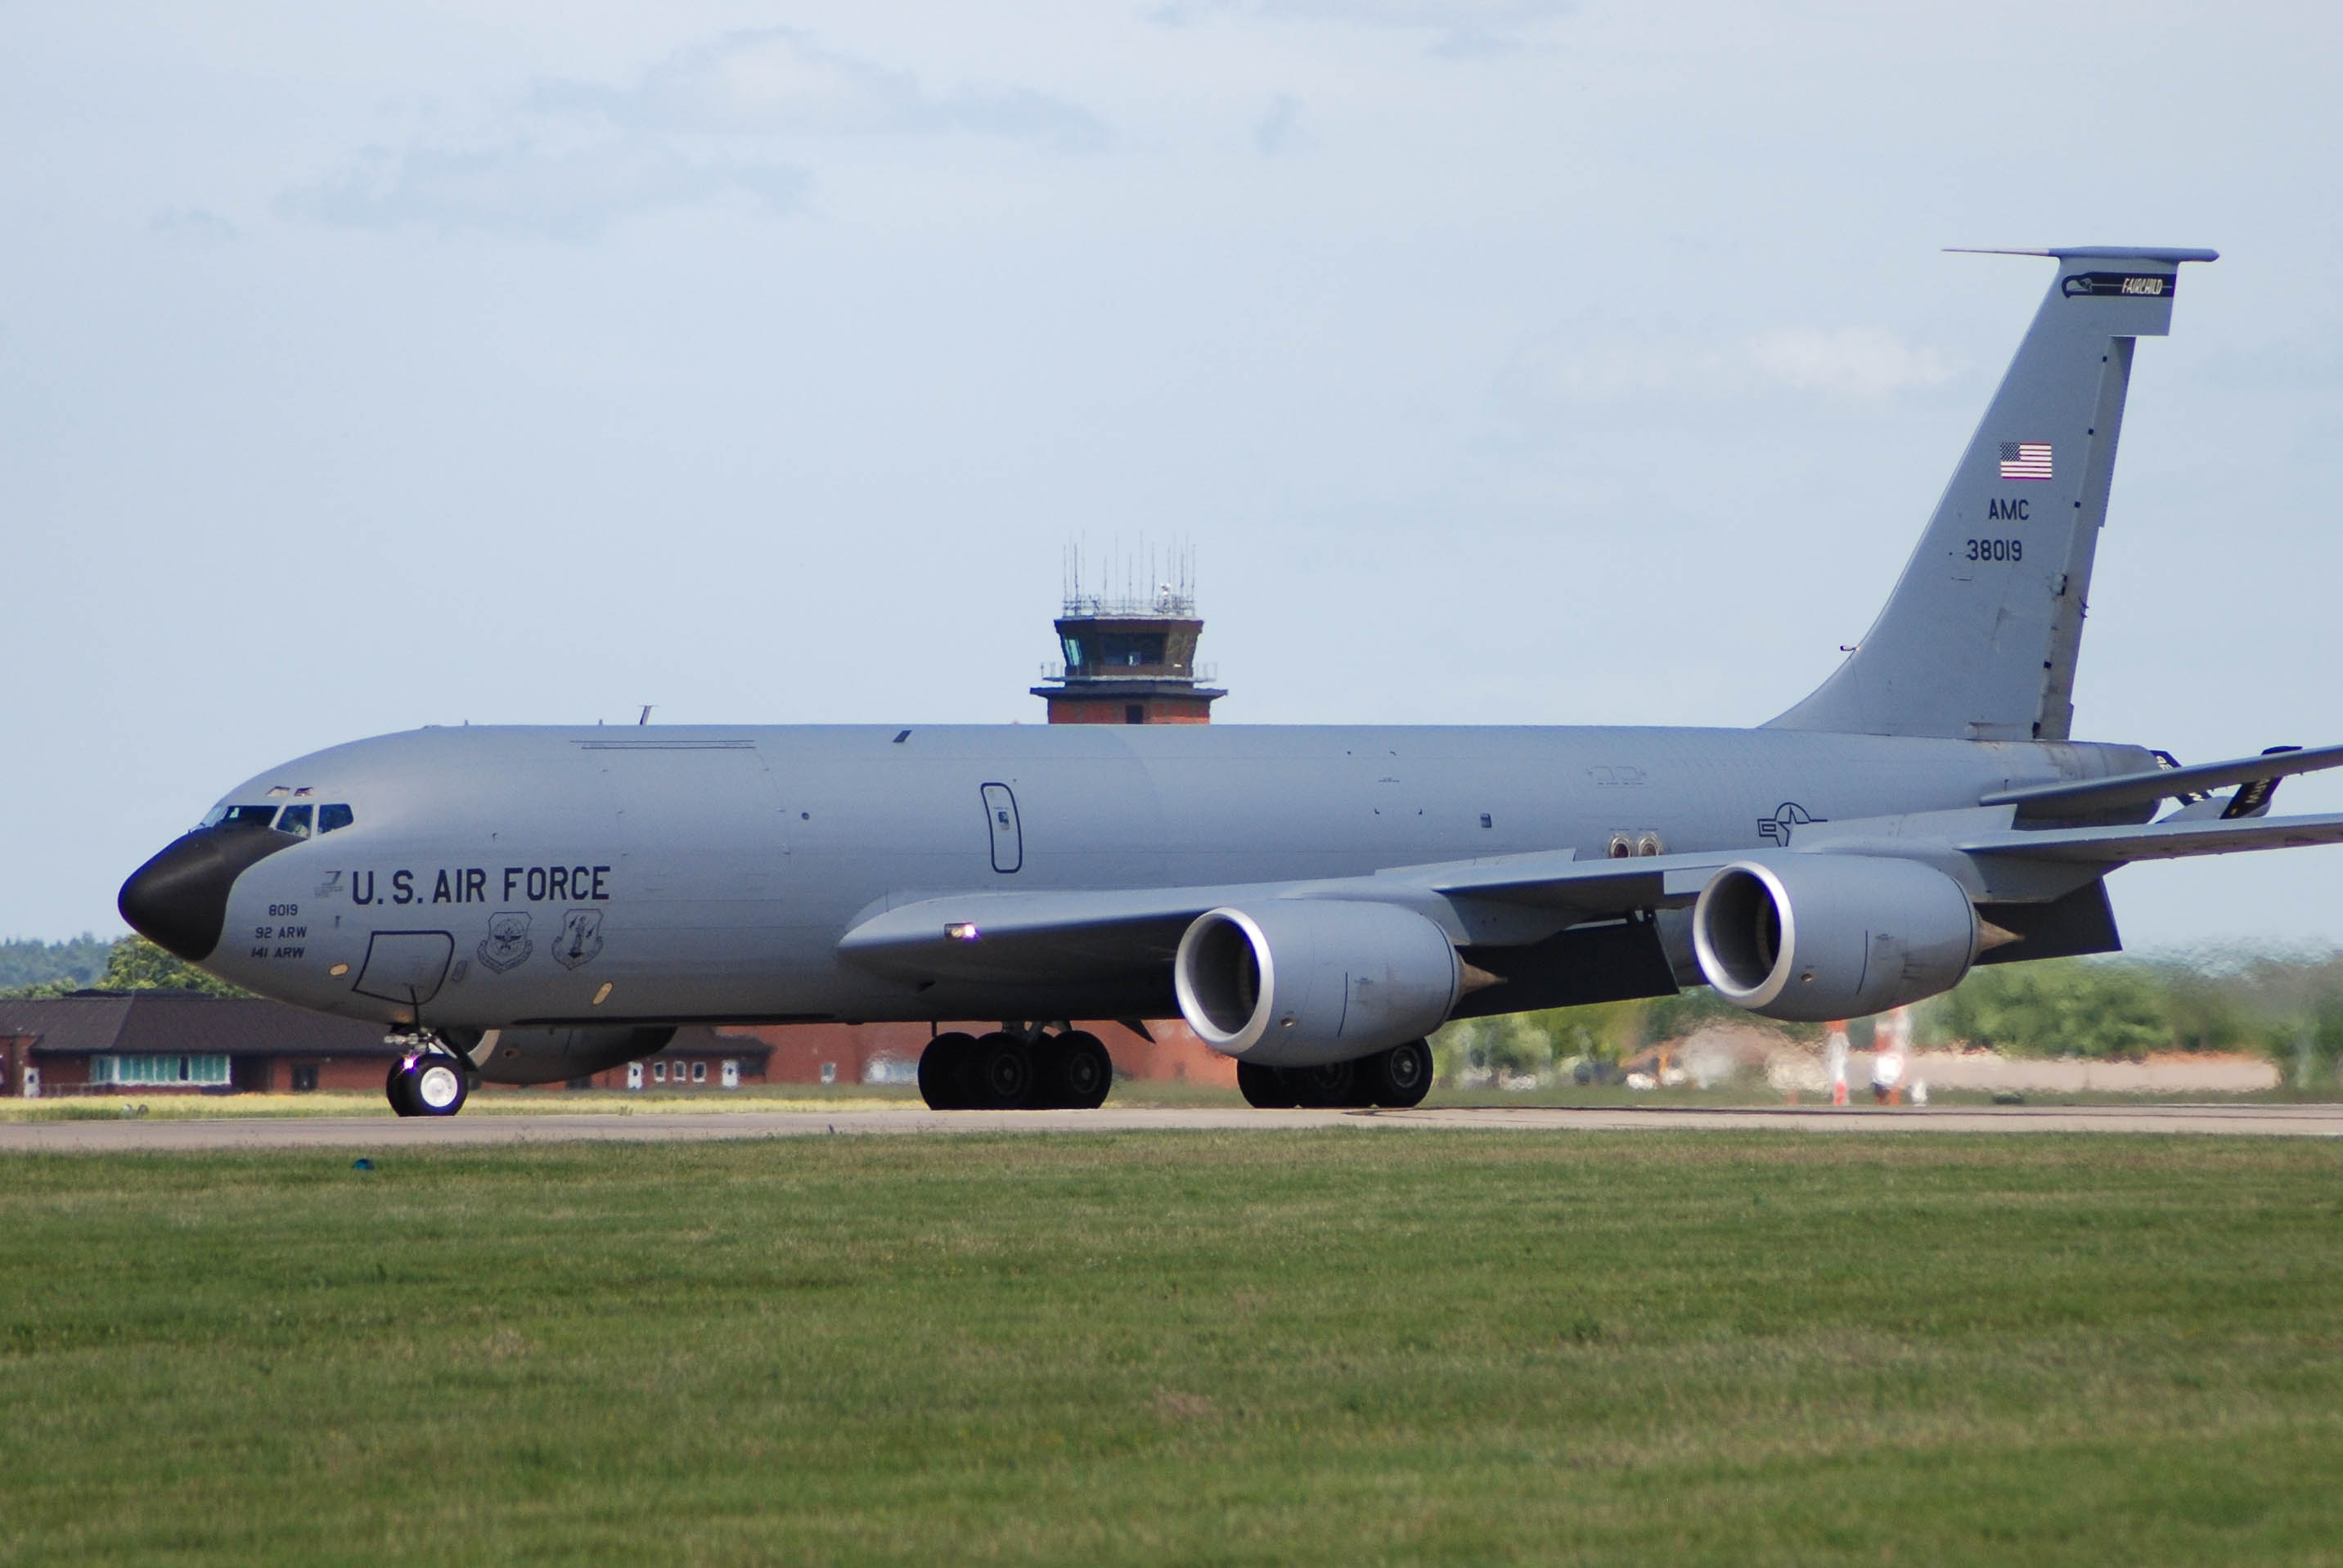 63-8019/638019 USAF - United States Air Force Boeing KC-135R Stratotanker Photo by colinw - AVSpotters.com